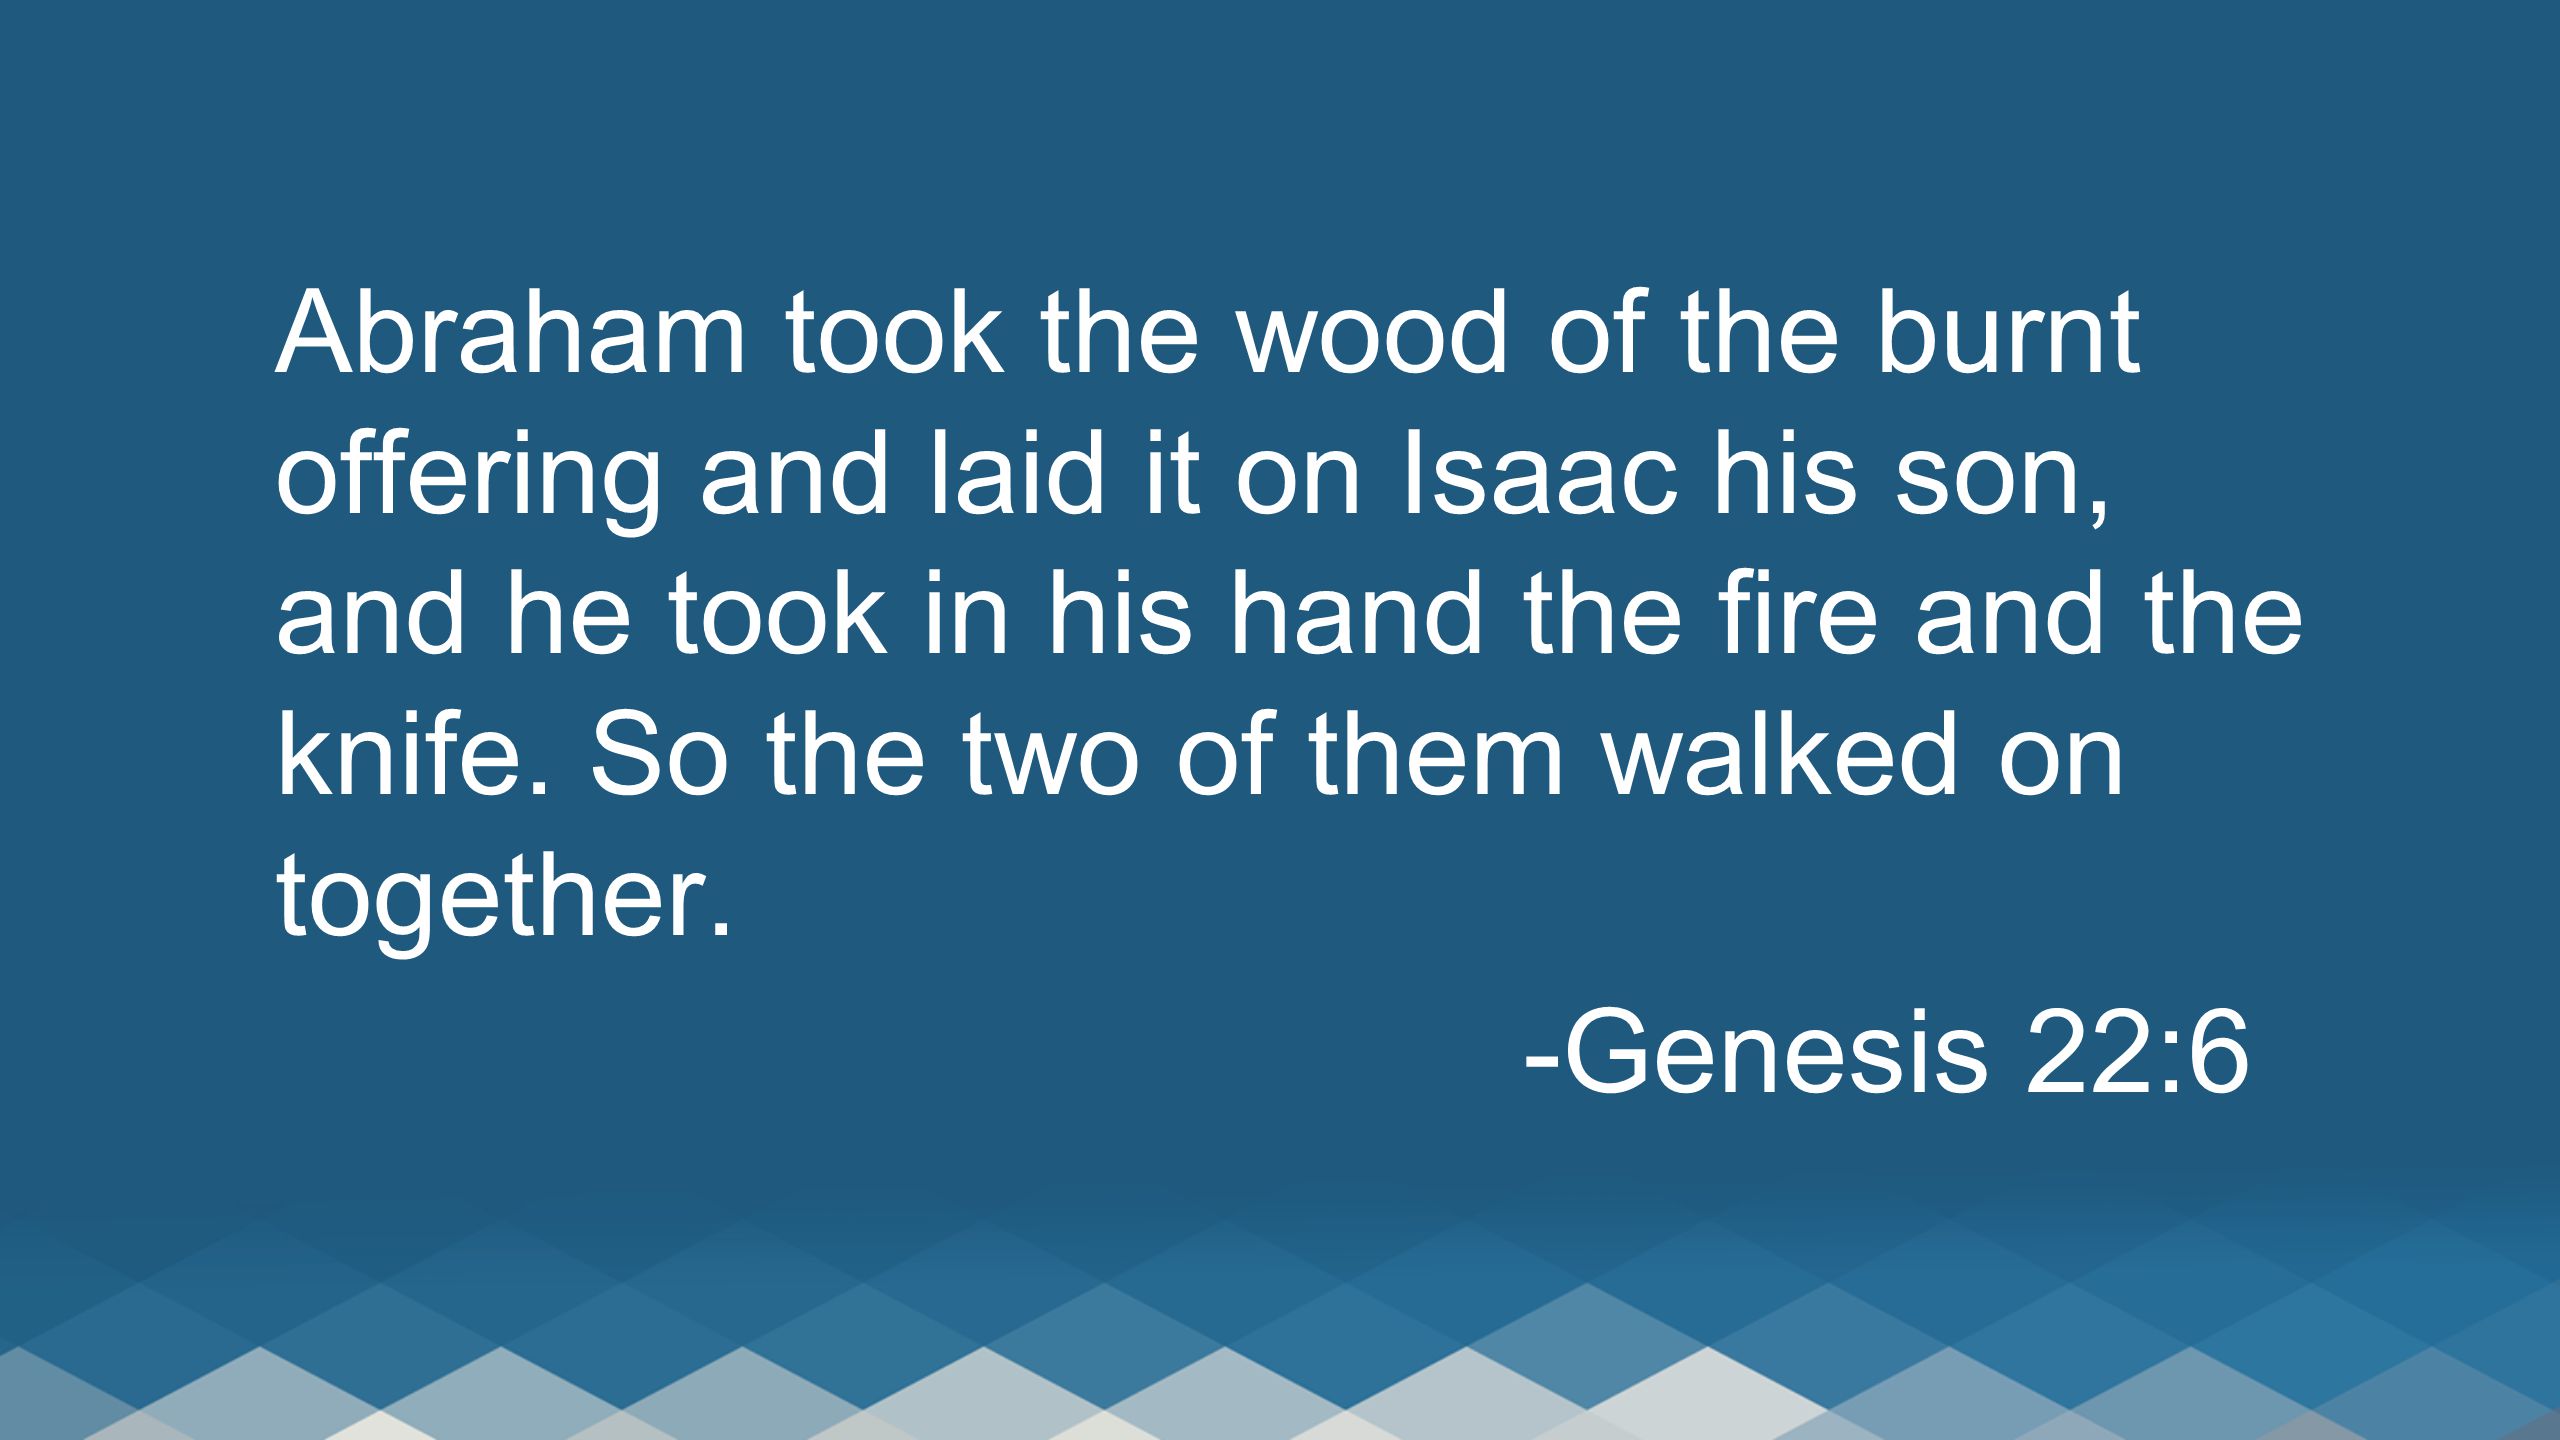 Abraham took the wood of the burnt offering and laid it on Isaac his son, and he took in his hand the fire and the knife.